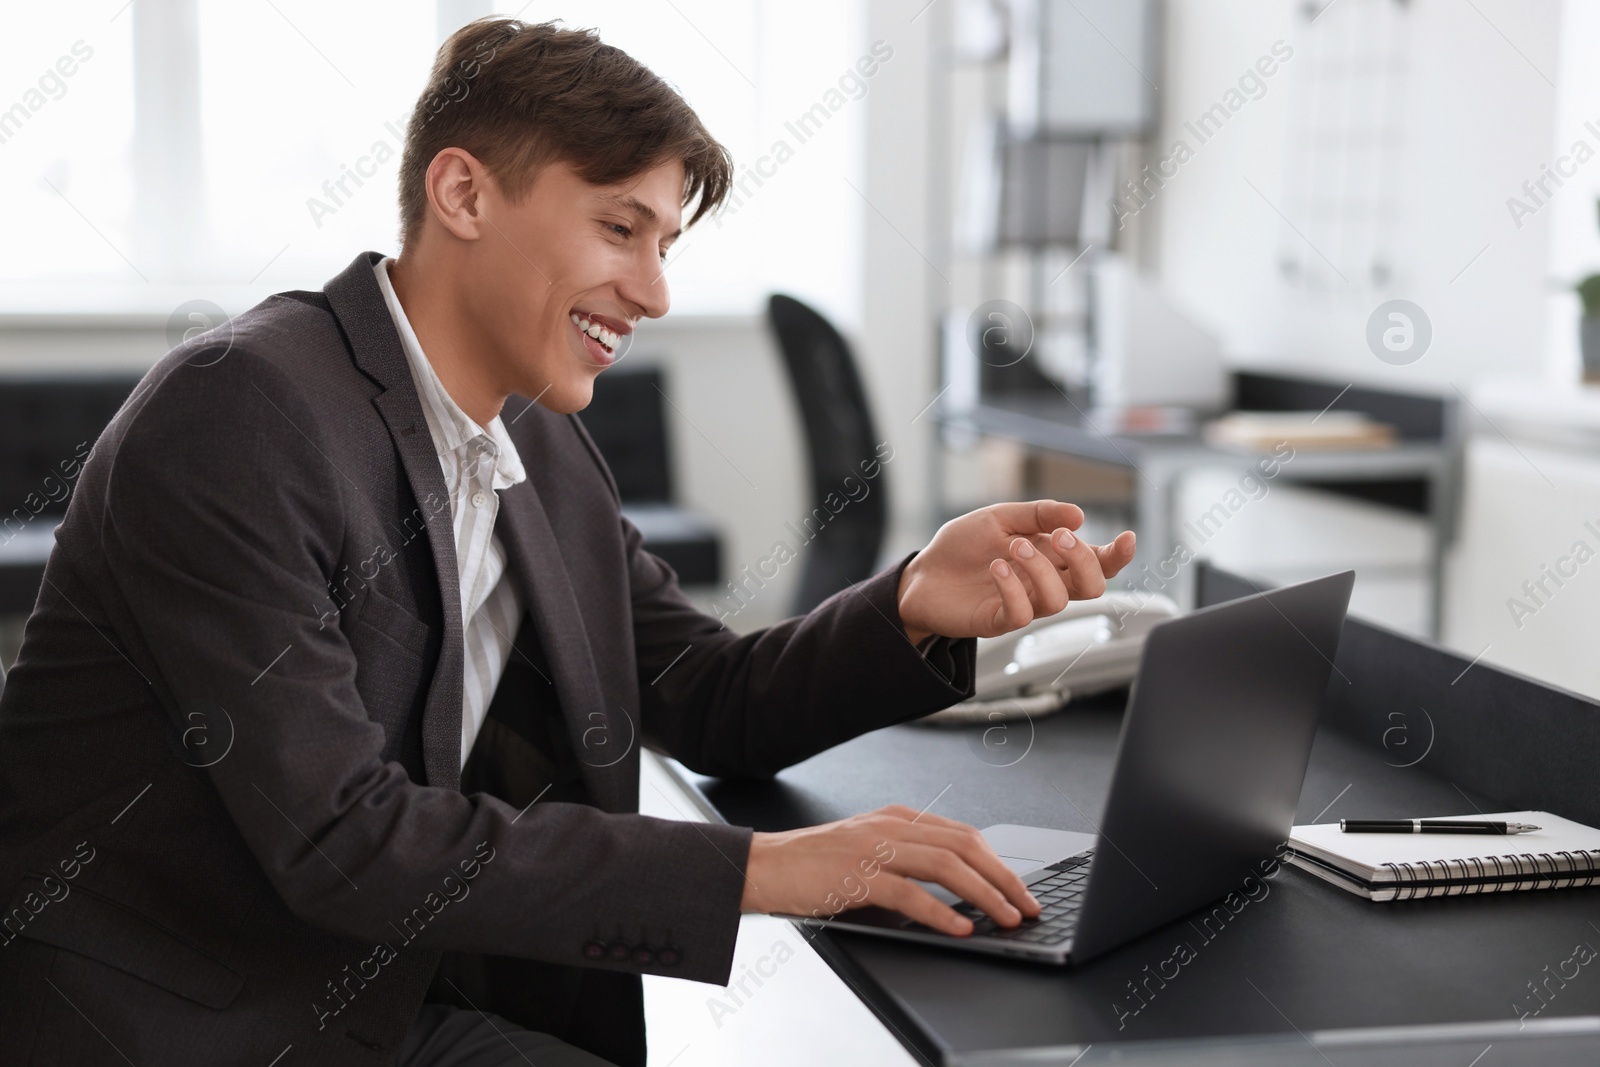 Photo of Man using video chat during webinar at table in office